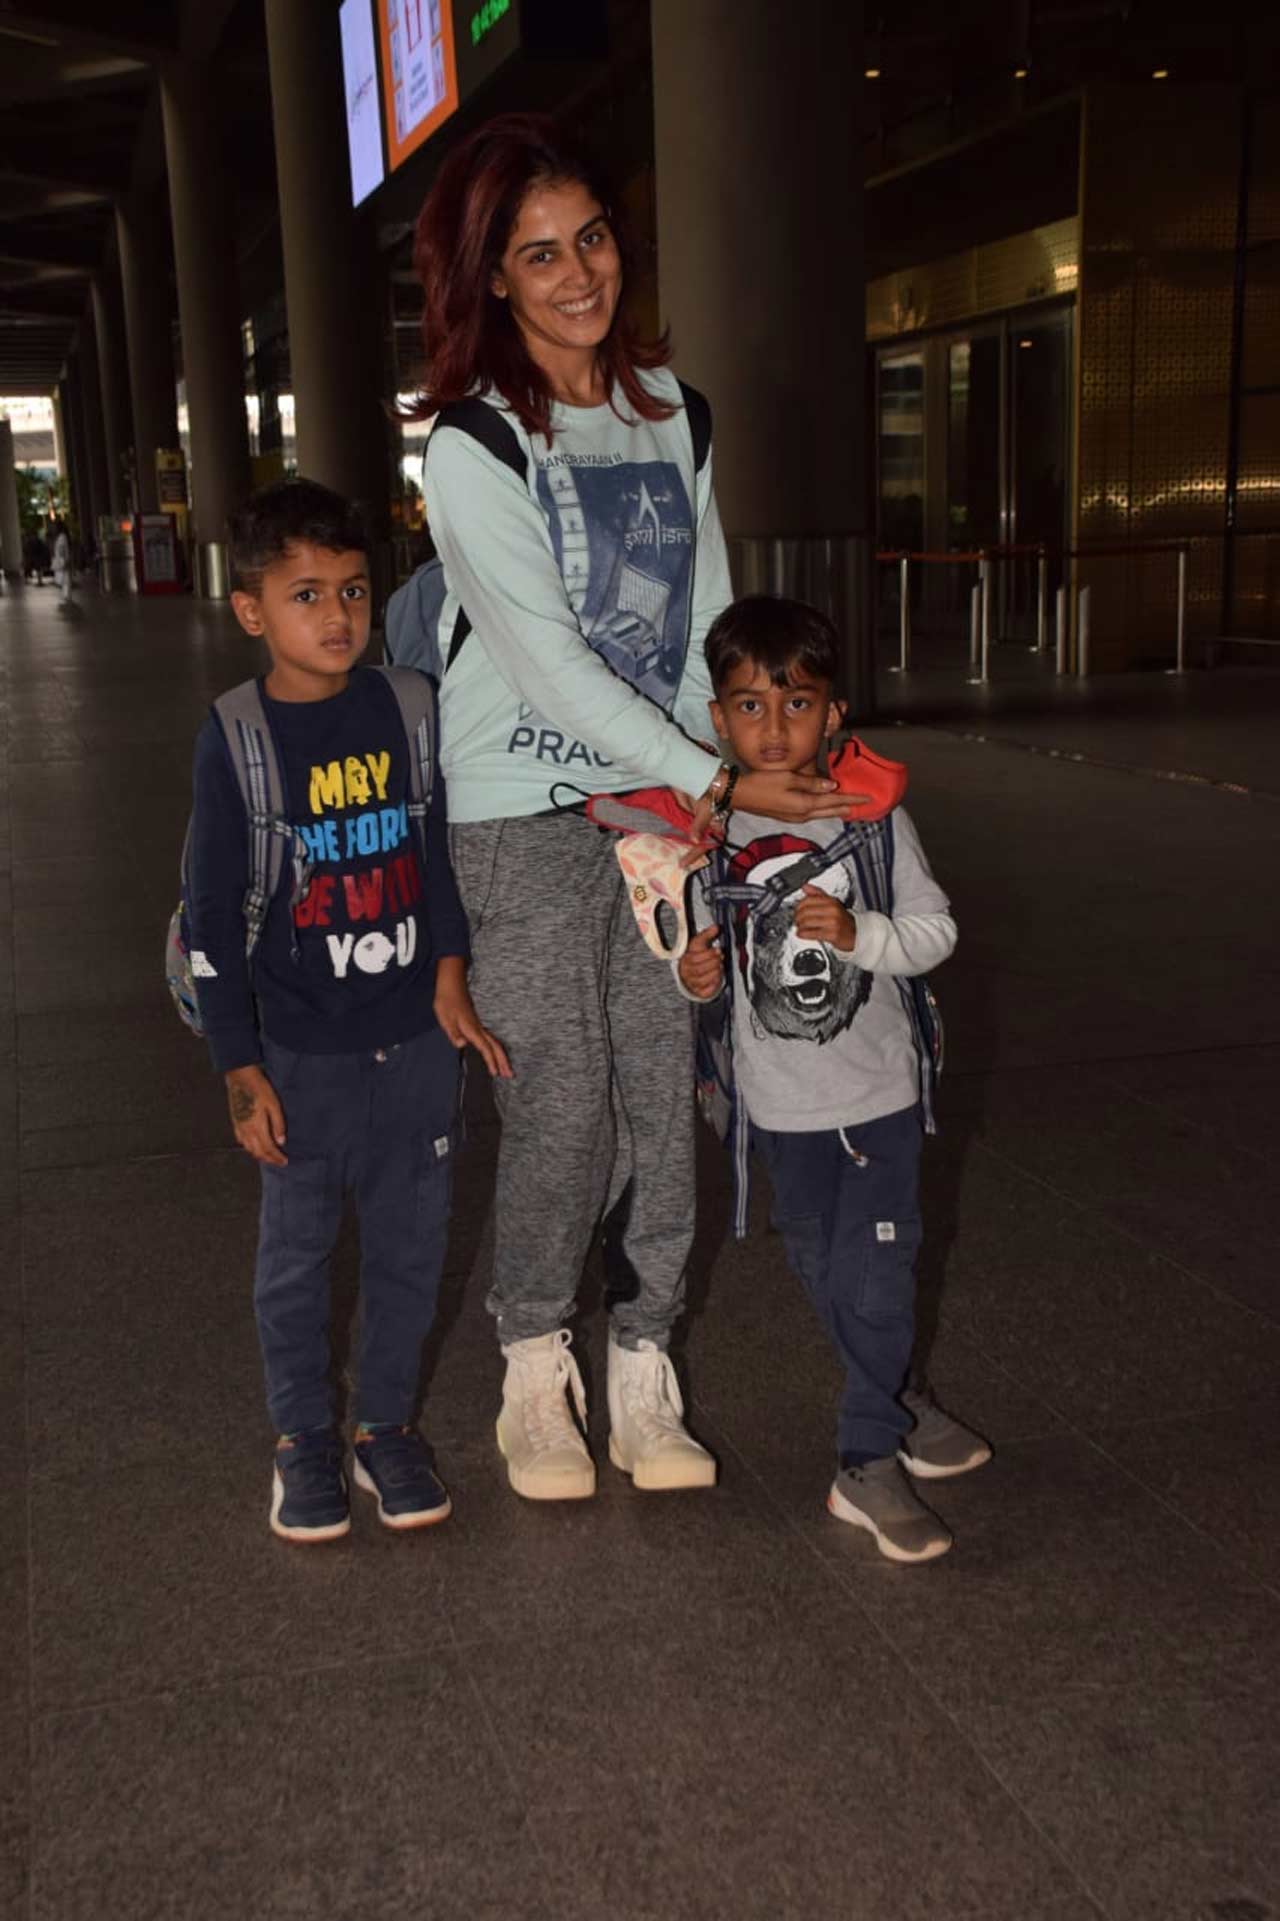 Genelia Deshmukh was all smiles when snapped by the shutterbugs at the Mumbai airport with kids.